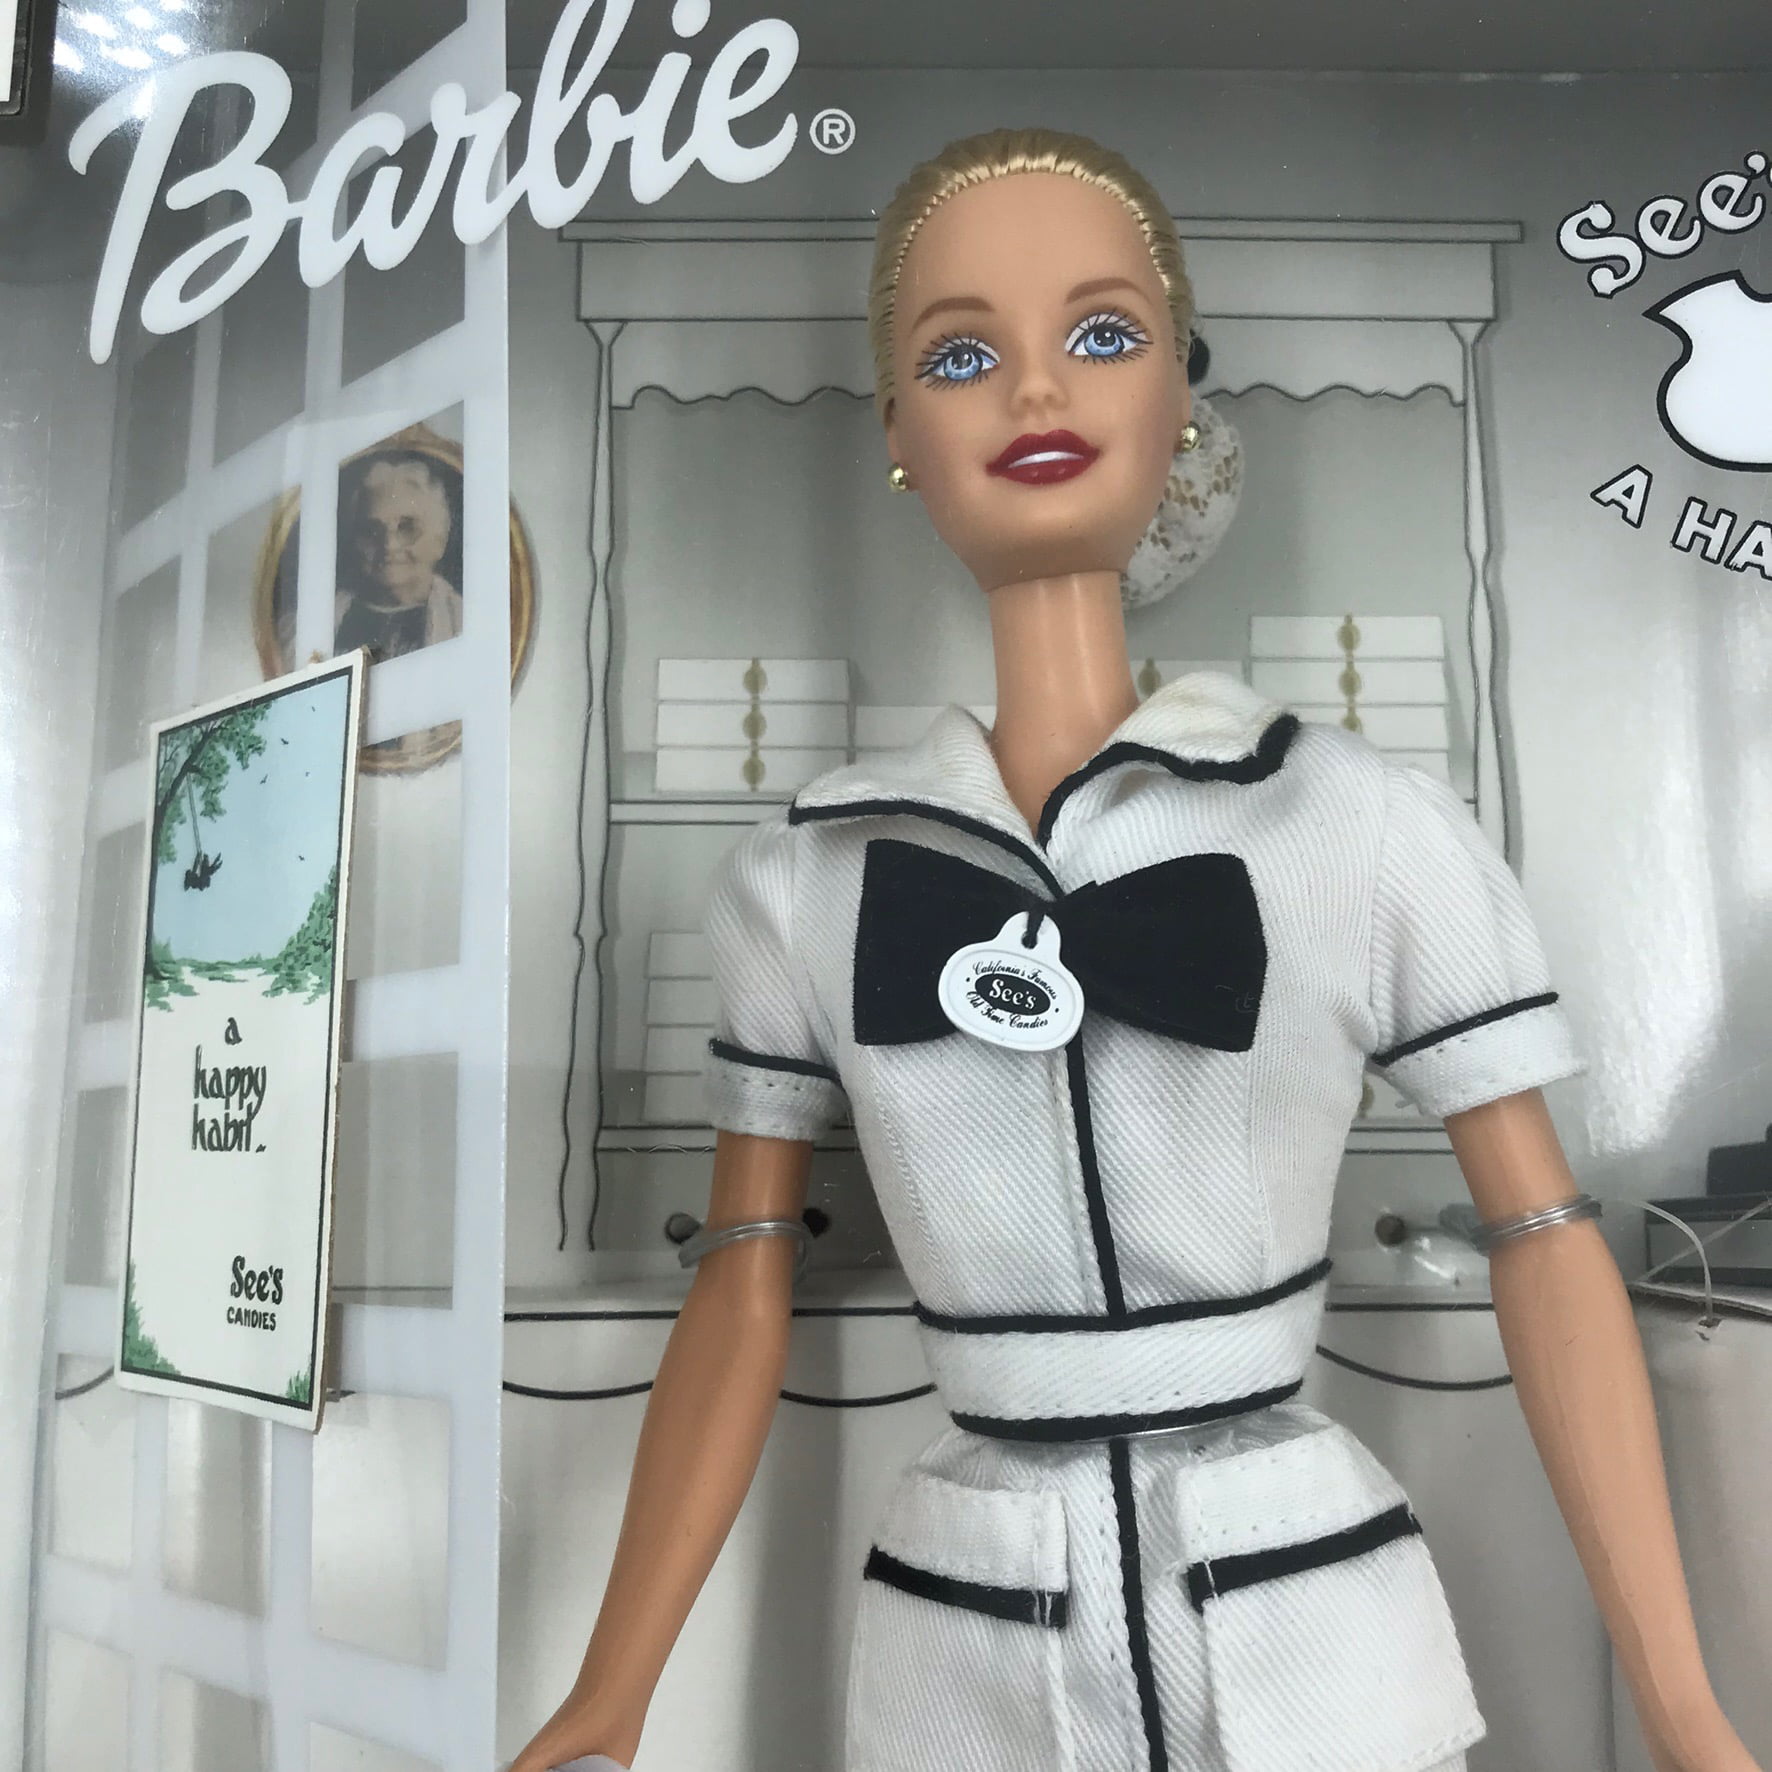 Barbie See's Candies Doll 1999 Blonde, A Happy Habit, First Job